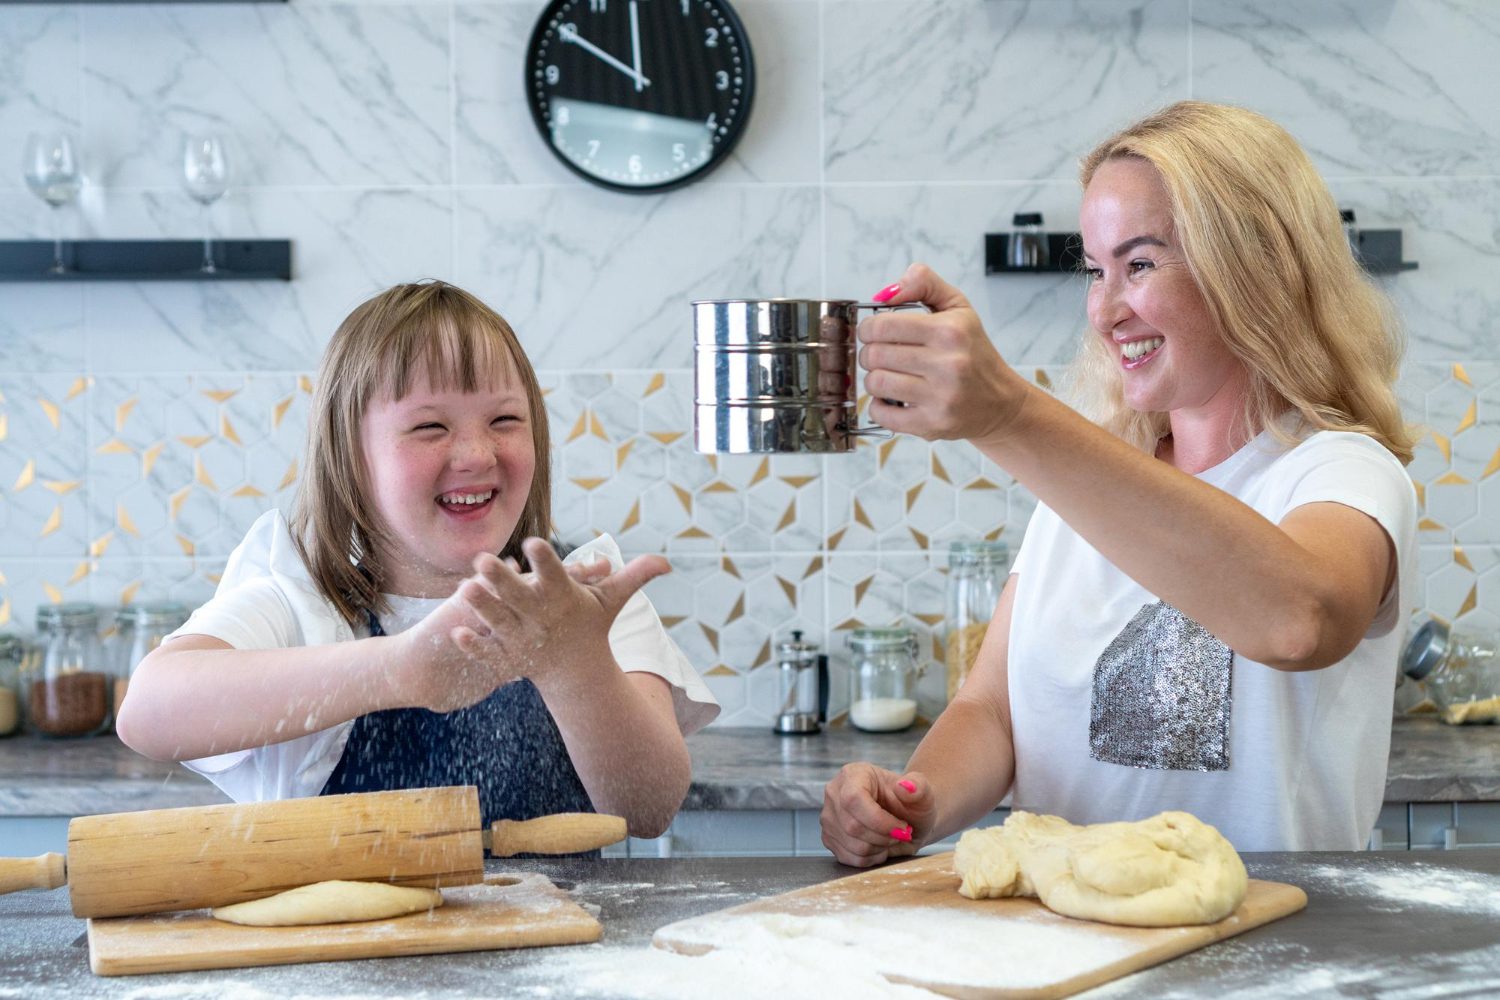 Daughter with Down syndrome helps her mother bake